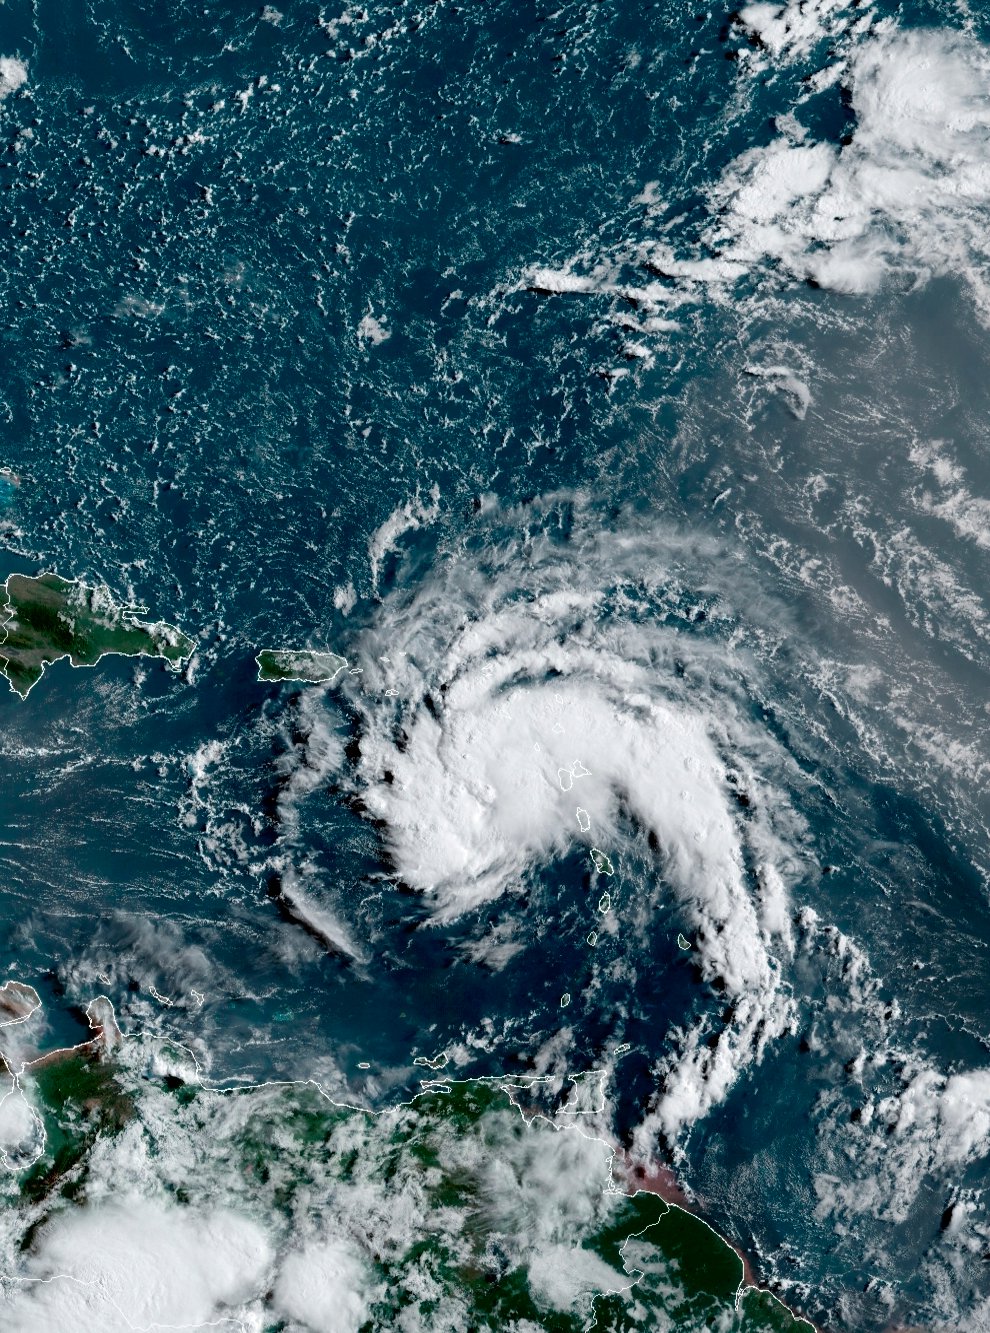 This satellite image provided by the National Oceanic and Atmospheric Administration (NOAA) shows a tropical storm east of Puerto Rico in the Caribbean, at 7:50am EST, Tuesday, Aug. 10, 2021. The National Hurricane Center issued tropical storm warnings for the U.S. Virgin Islands and Puerto Rico, where forecasters expected the potential cyclone to strengthen Tuesday into the sixth named storm, Fred, of the Atlantic hurricane season. (NOAA/NESDIS/STAR GOES via AP)